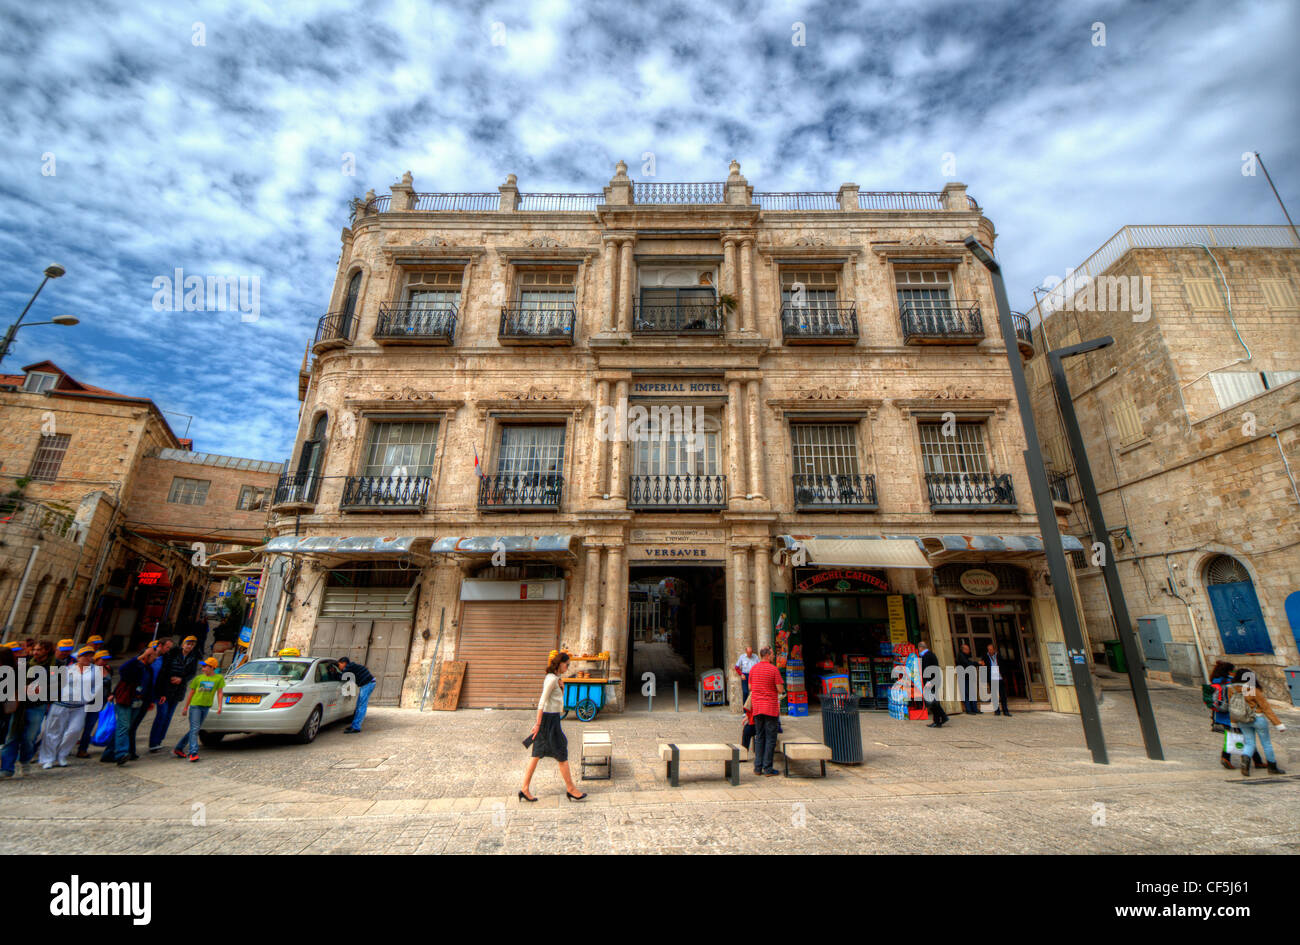 The historic Imperial Hotel in the Old City of Jerusalem, Israel. Stock Photo